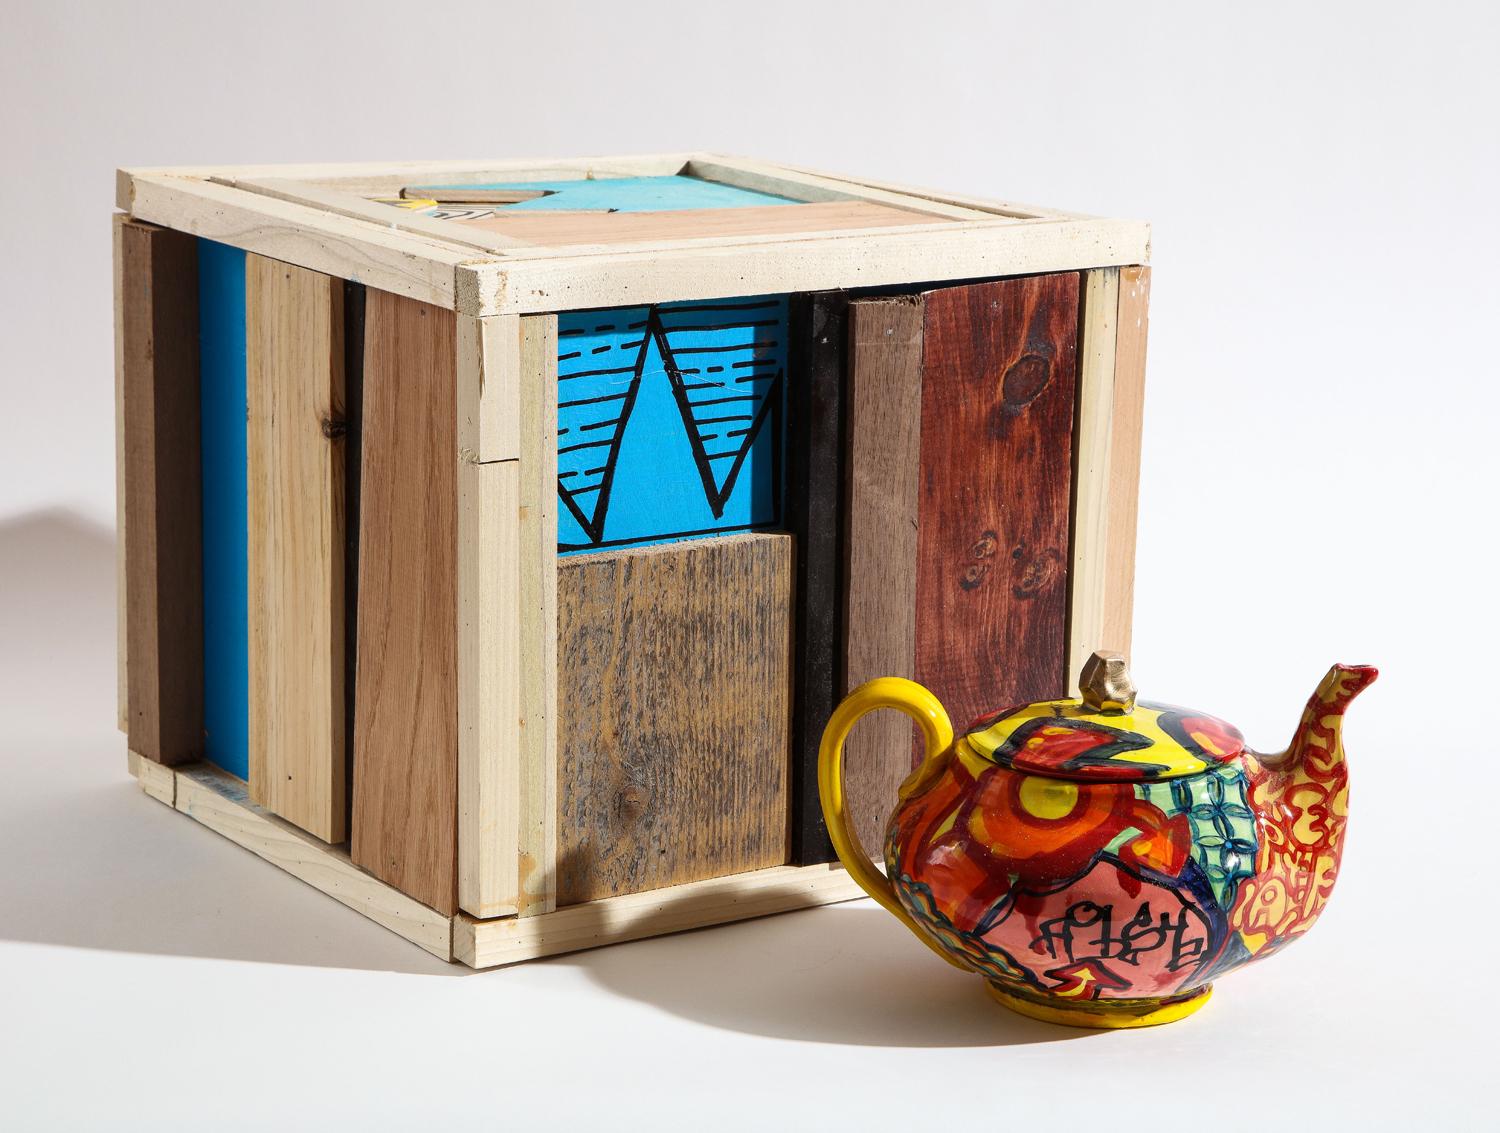 Roberto Lugo
Marian Anderson teapot and box set, 2021
Glazed porcelain and enamel paint; acrylic and marker on wood box
Measures: Teapot: 5.75 x 9 x 7 in
Box: 12 x 14 x 14 in.